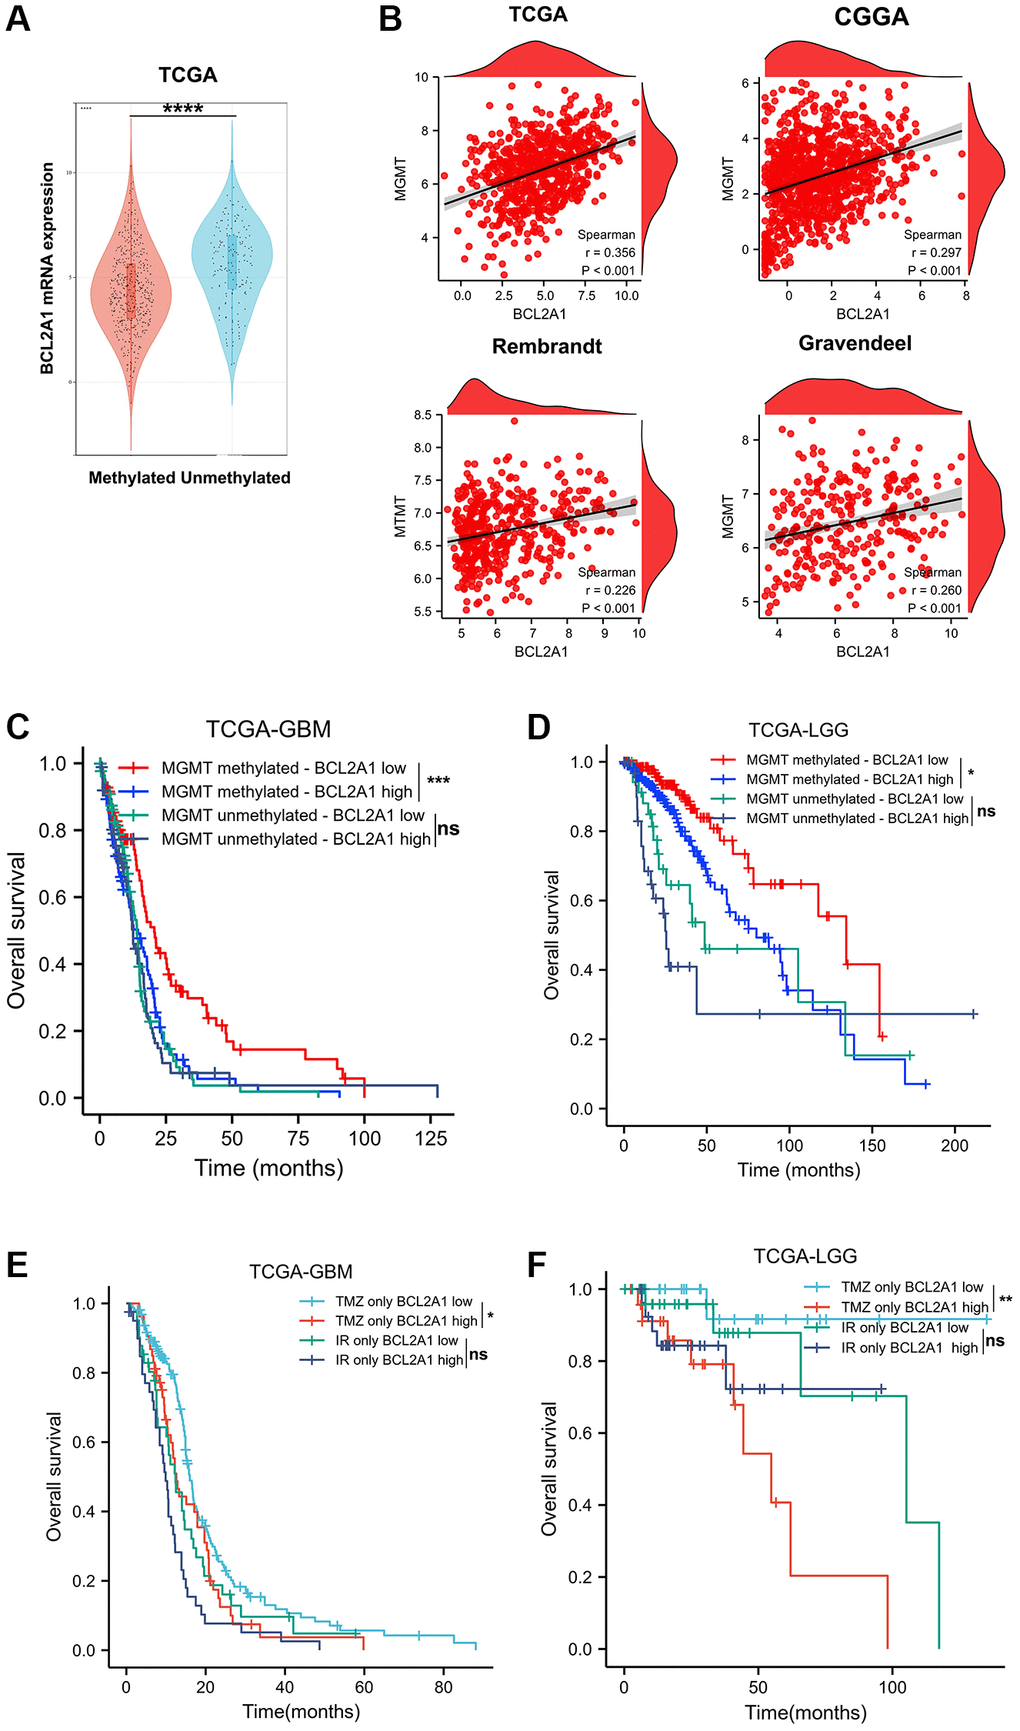 BCL2A1 was an independent predictor of response to temozolomide in gliomas. (A) BCL2A1 expression in gliomas with methylated or unmethylated MGMT promoters. (B) The correlation between BCL2A1 and MGMT expression in public datasets. (C, D) Effect of BCL2A1 on the prognosis of patients with GBM and LGG with different MGMT promoter methylation statuses. (E, F) Effect of BCL2A1 on the prognosis of glioma patients who received TMZ chemotherapy or IR alone. Abbreviations: IR: ion radiotherapy; ns: non-significant. *P **P ***P ****P 